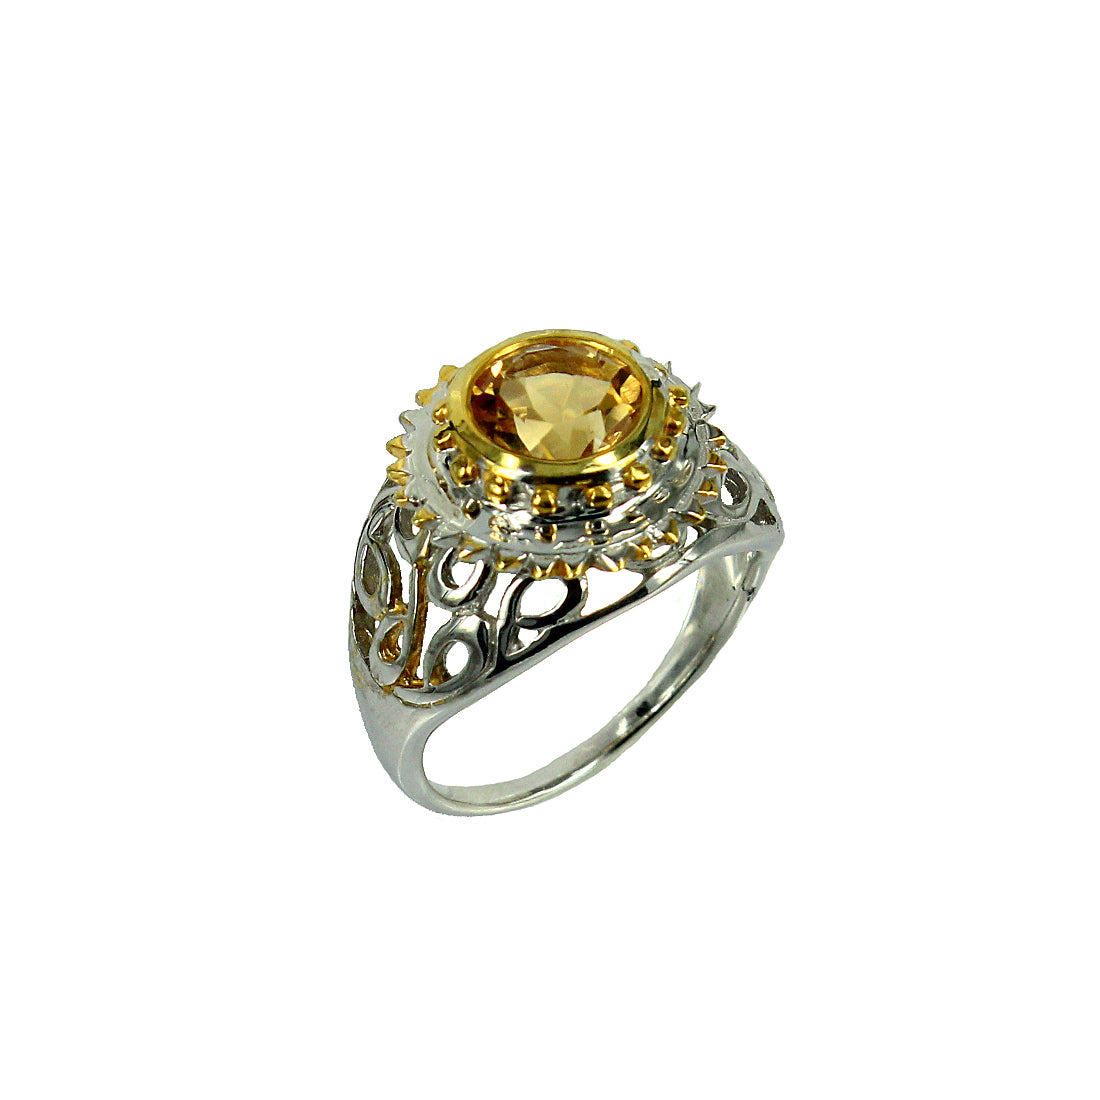 SteamPunk - 925 Sterling Silver Ring, Decorated with Citrine, Plated with 3 Micron 22K Yellow Gold and White Rhodium